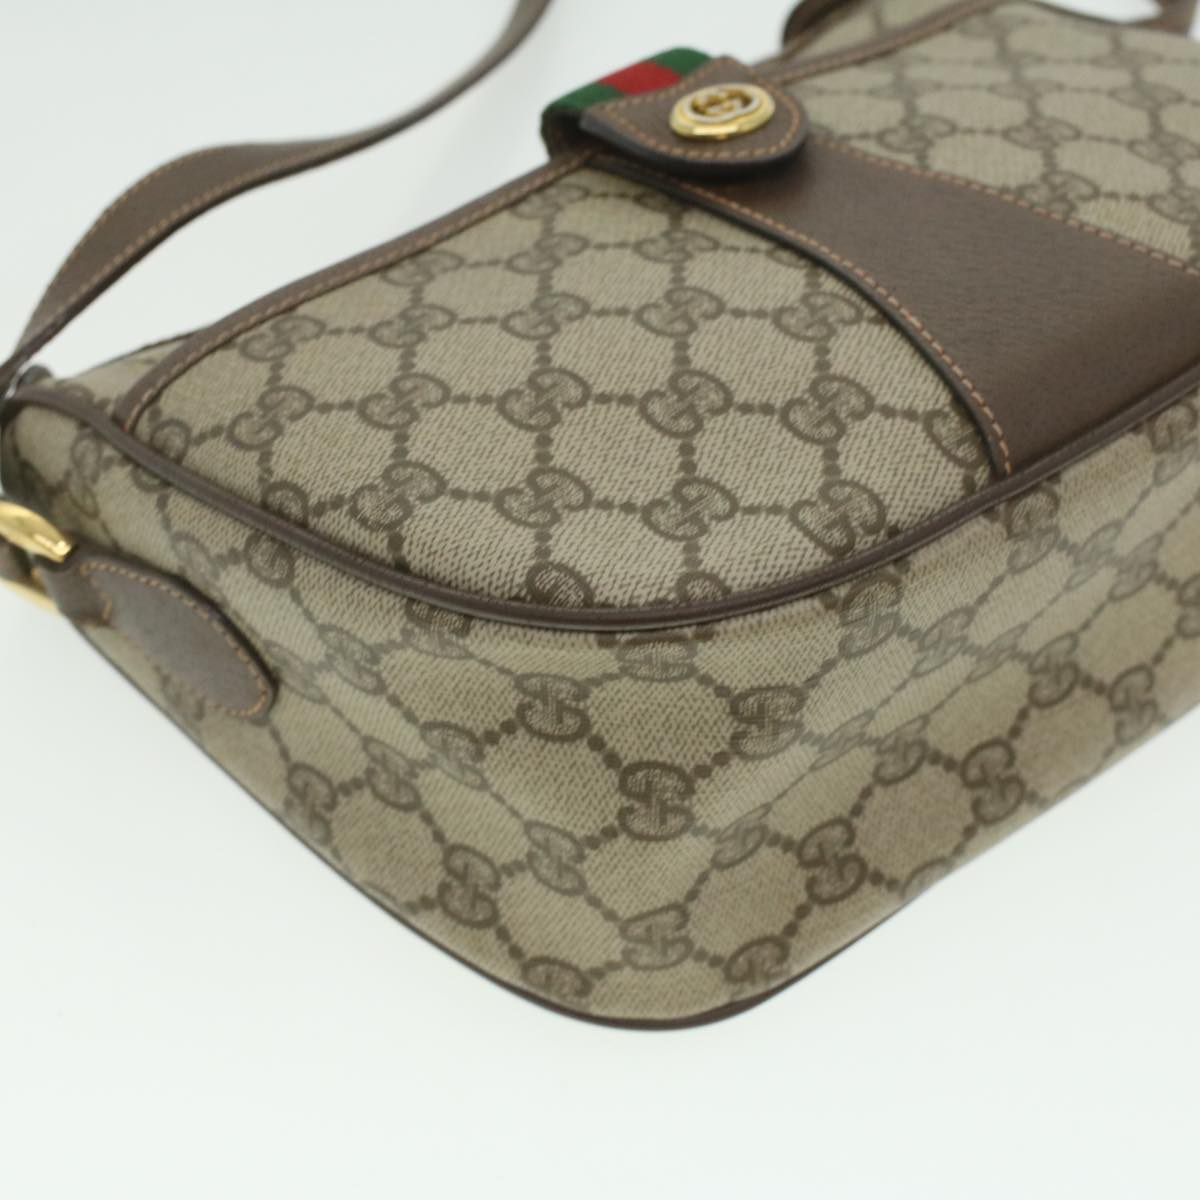 GUCCI GG Canvas Web Sherry Line Shoulder Bag Beige Red 89.02.032 Auth 37708